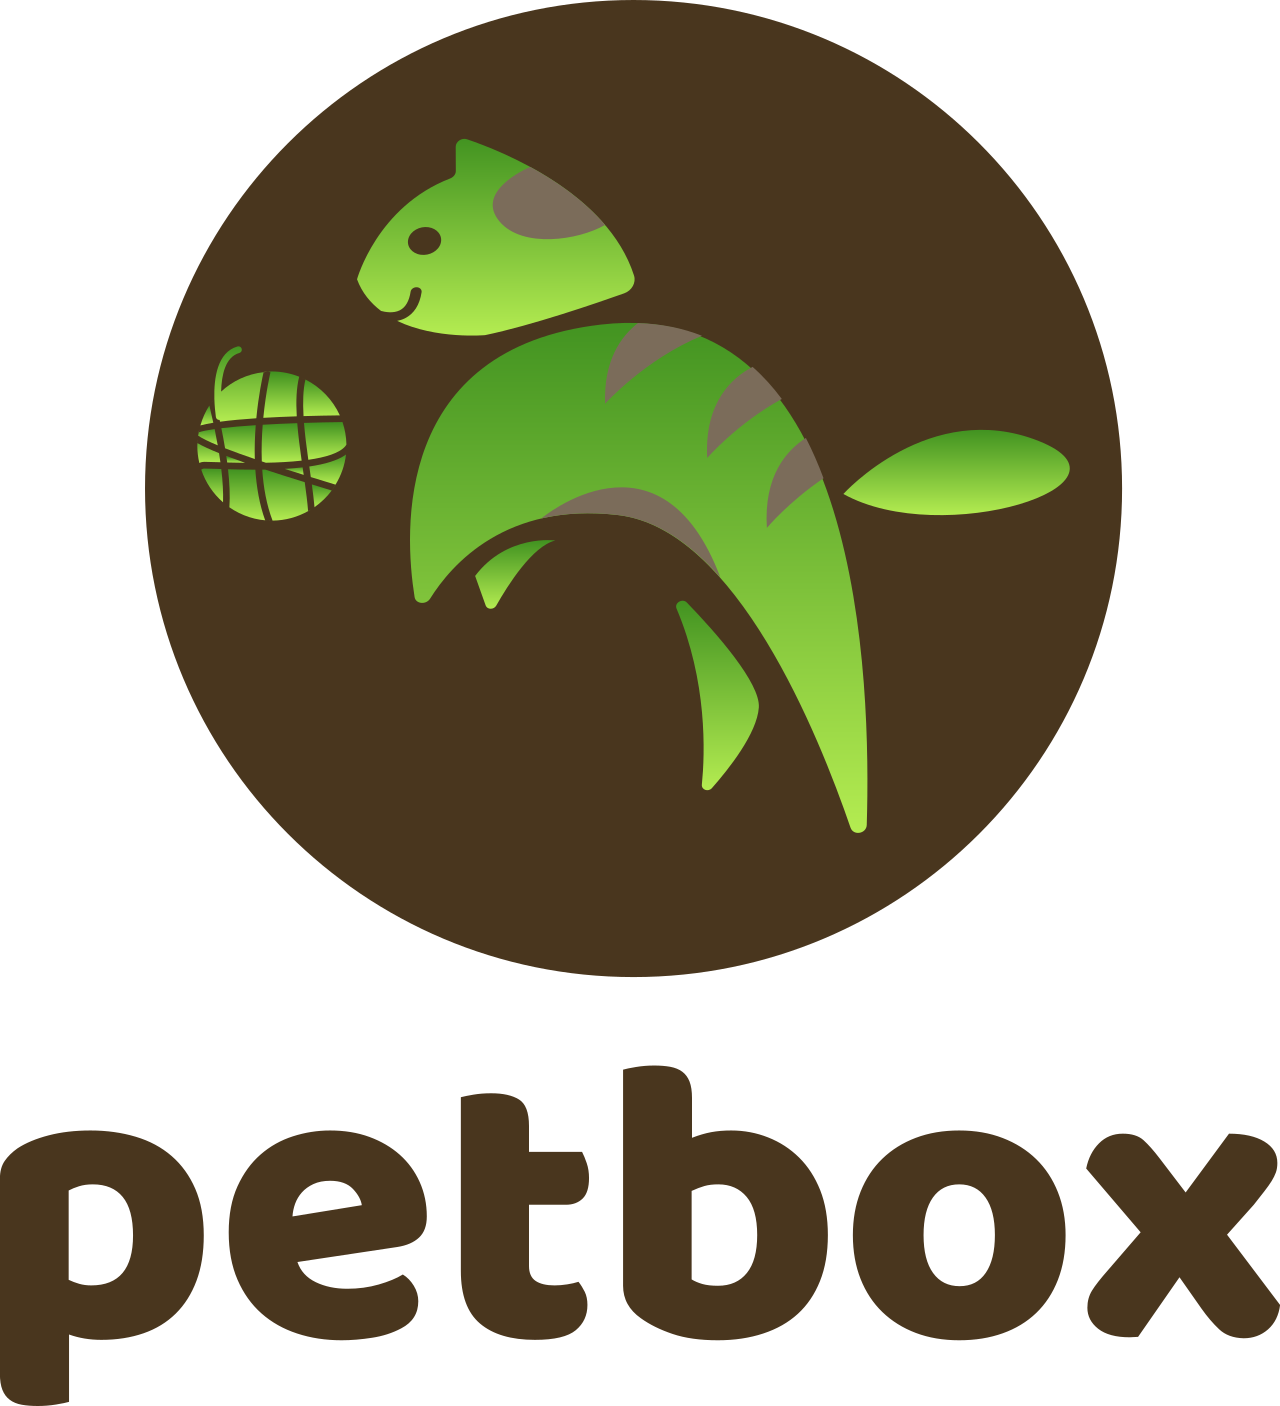 petbox's web page